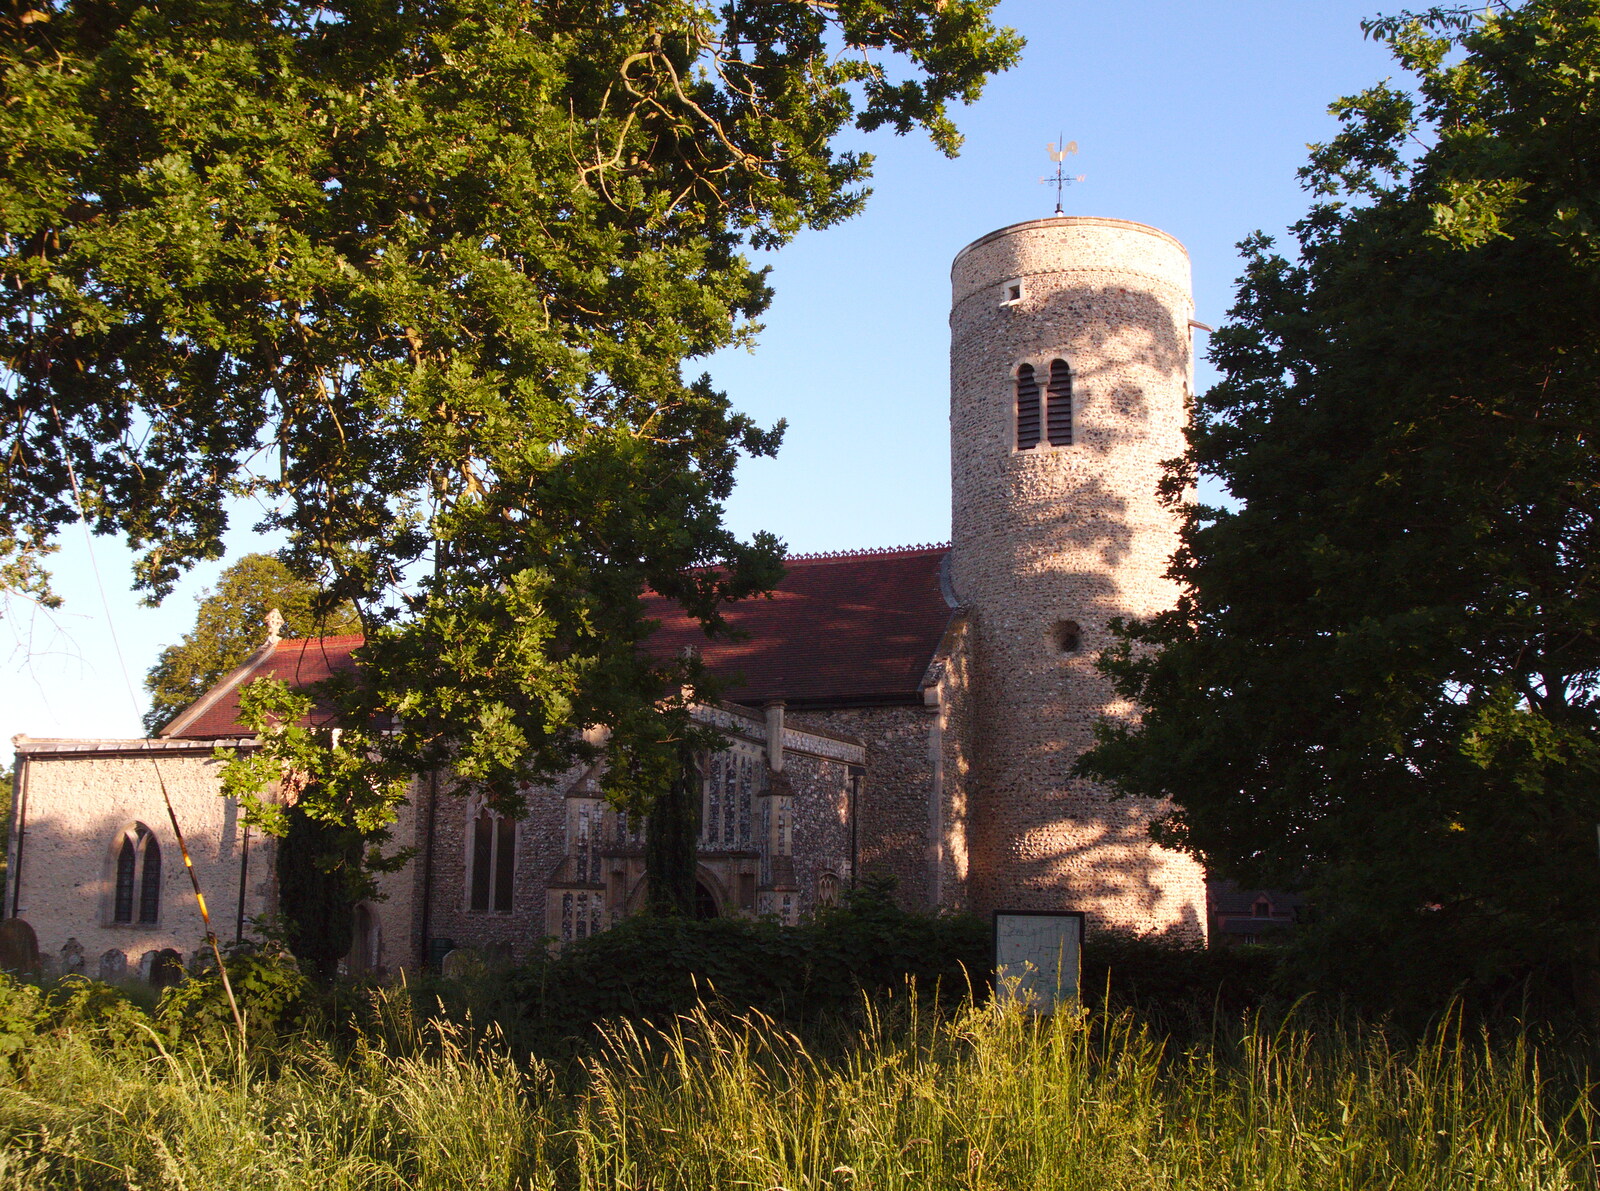 The round tower of Gissing Church from The BSCC at Gissing, Taxi Protests and Eye Scarecrows - 8th June 2019